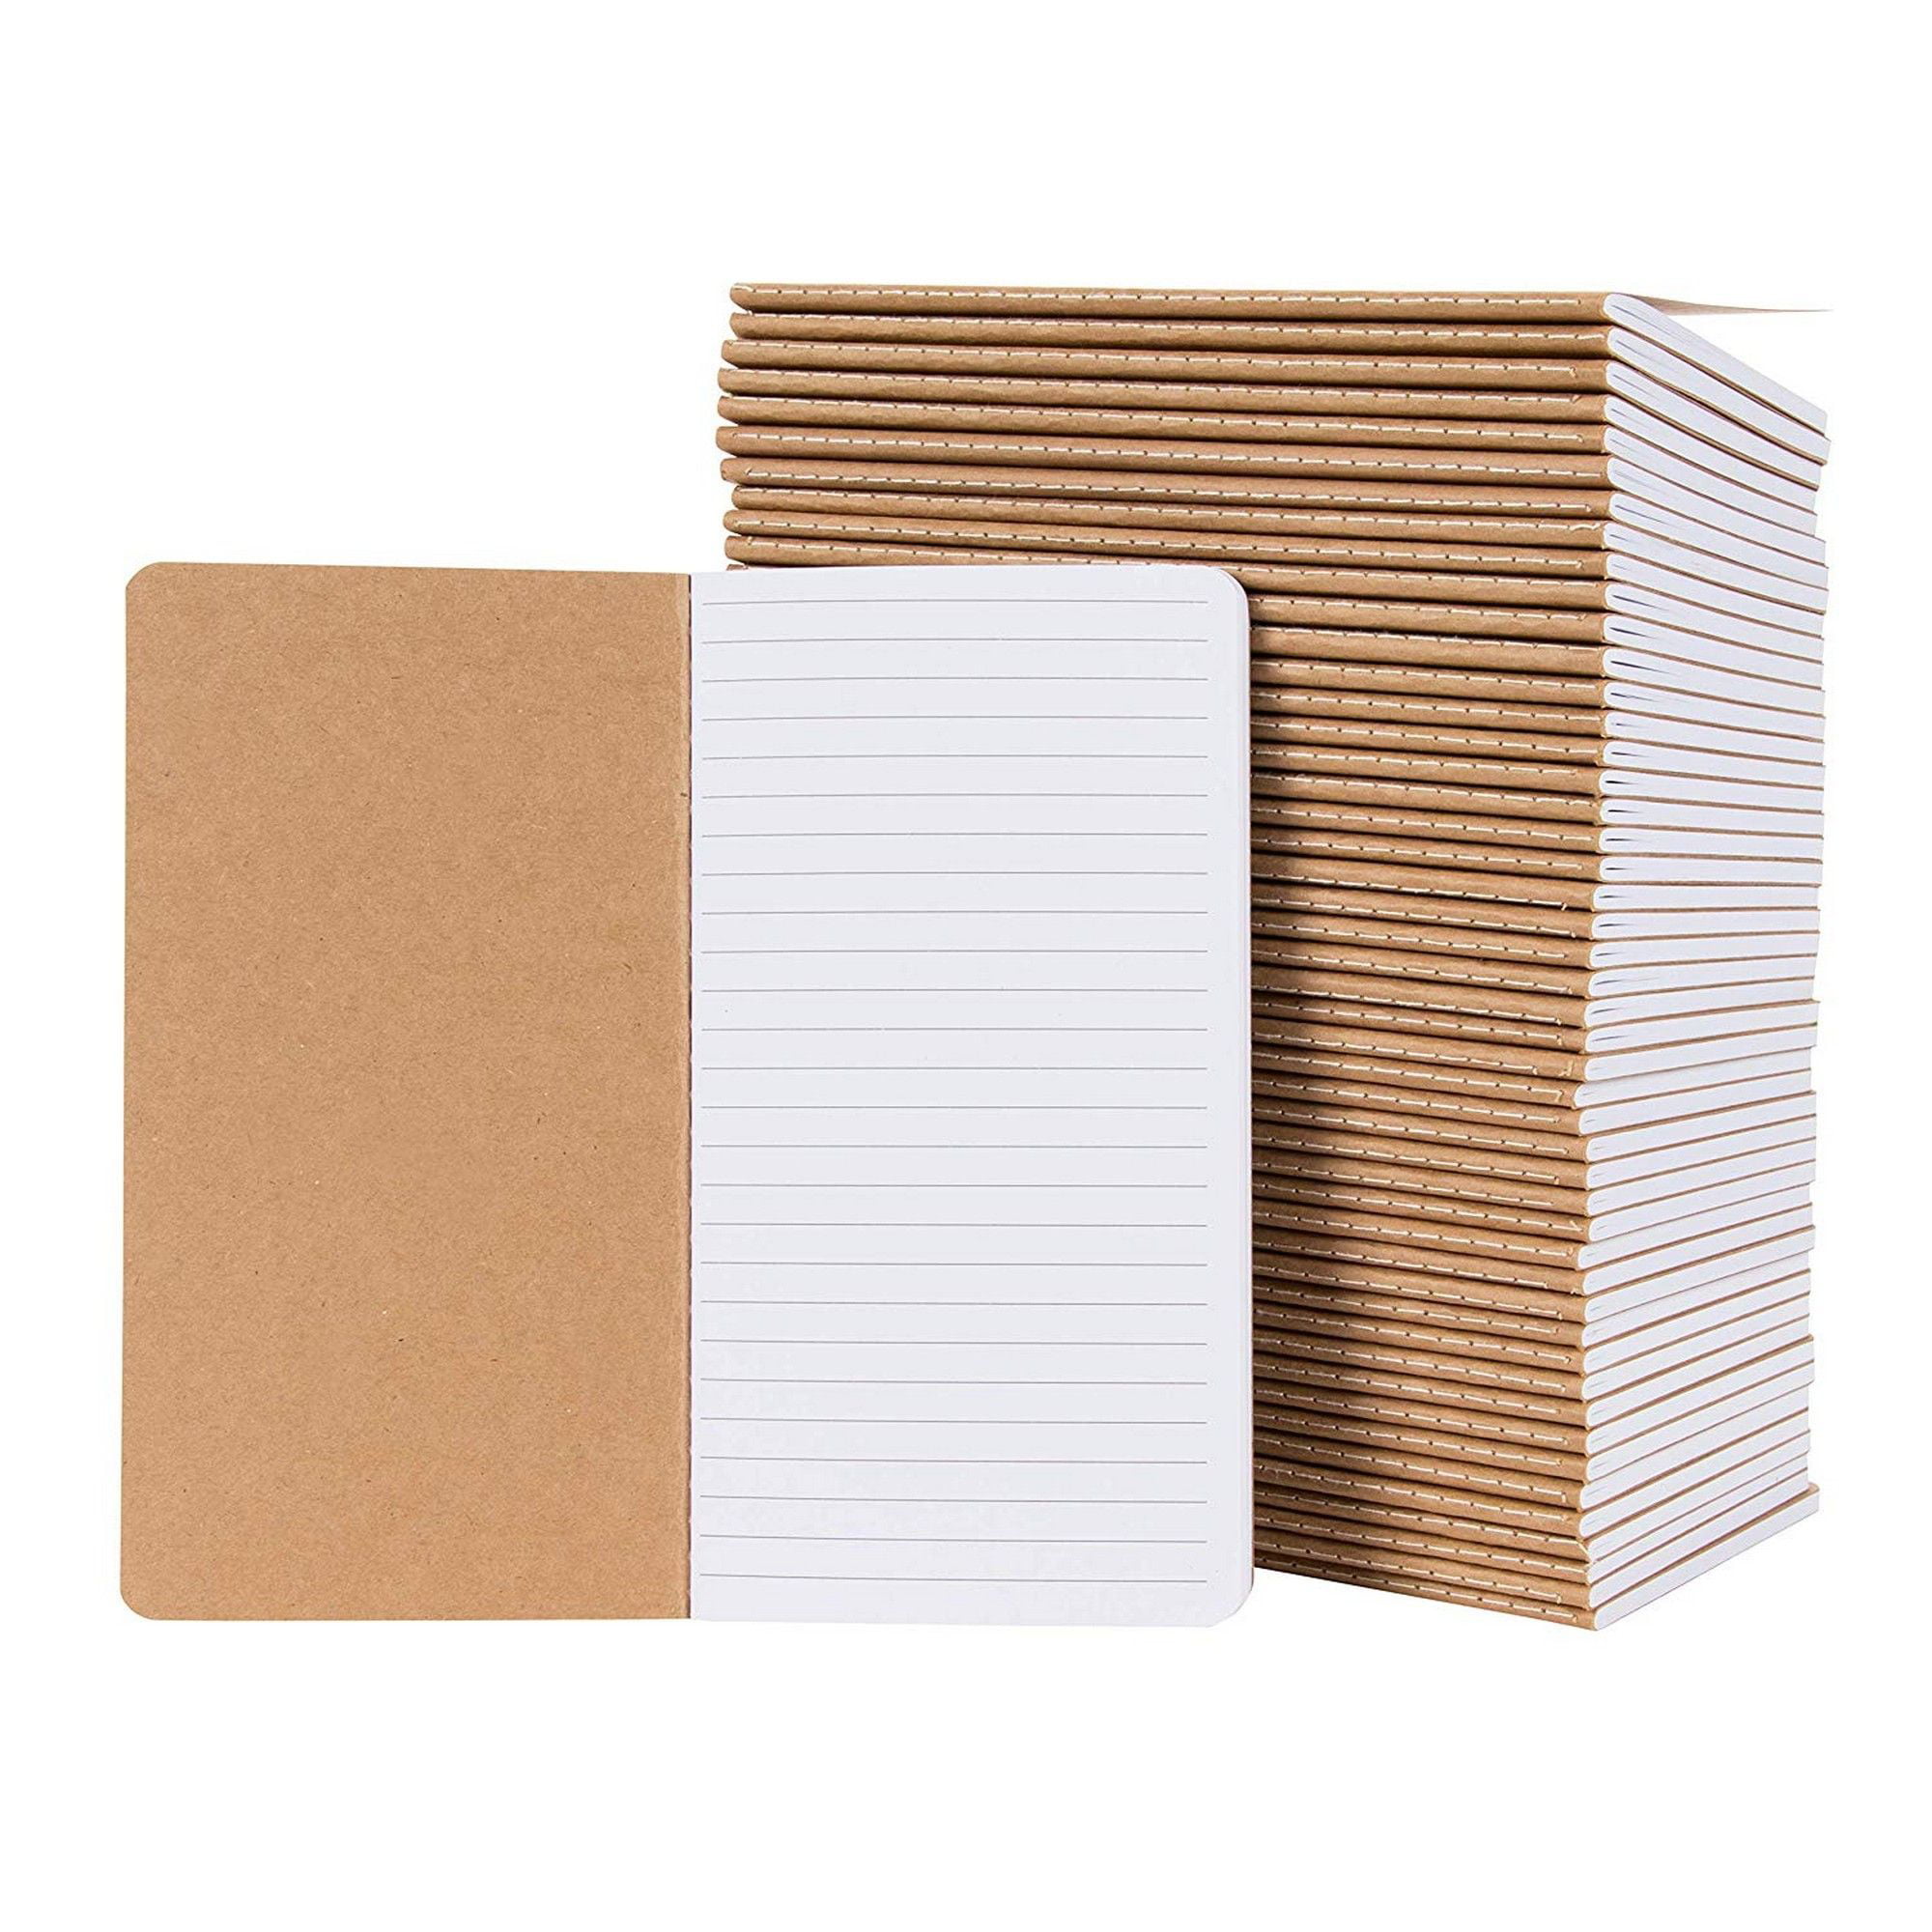 Liobaba A5 Coils Notebook Student Diary Notebook B5 Loose Leaf Work Sketching Exercise Office Notepad